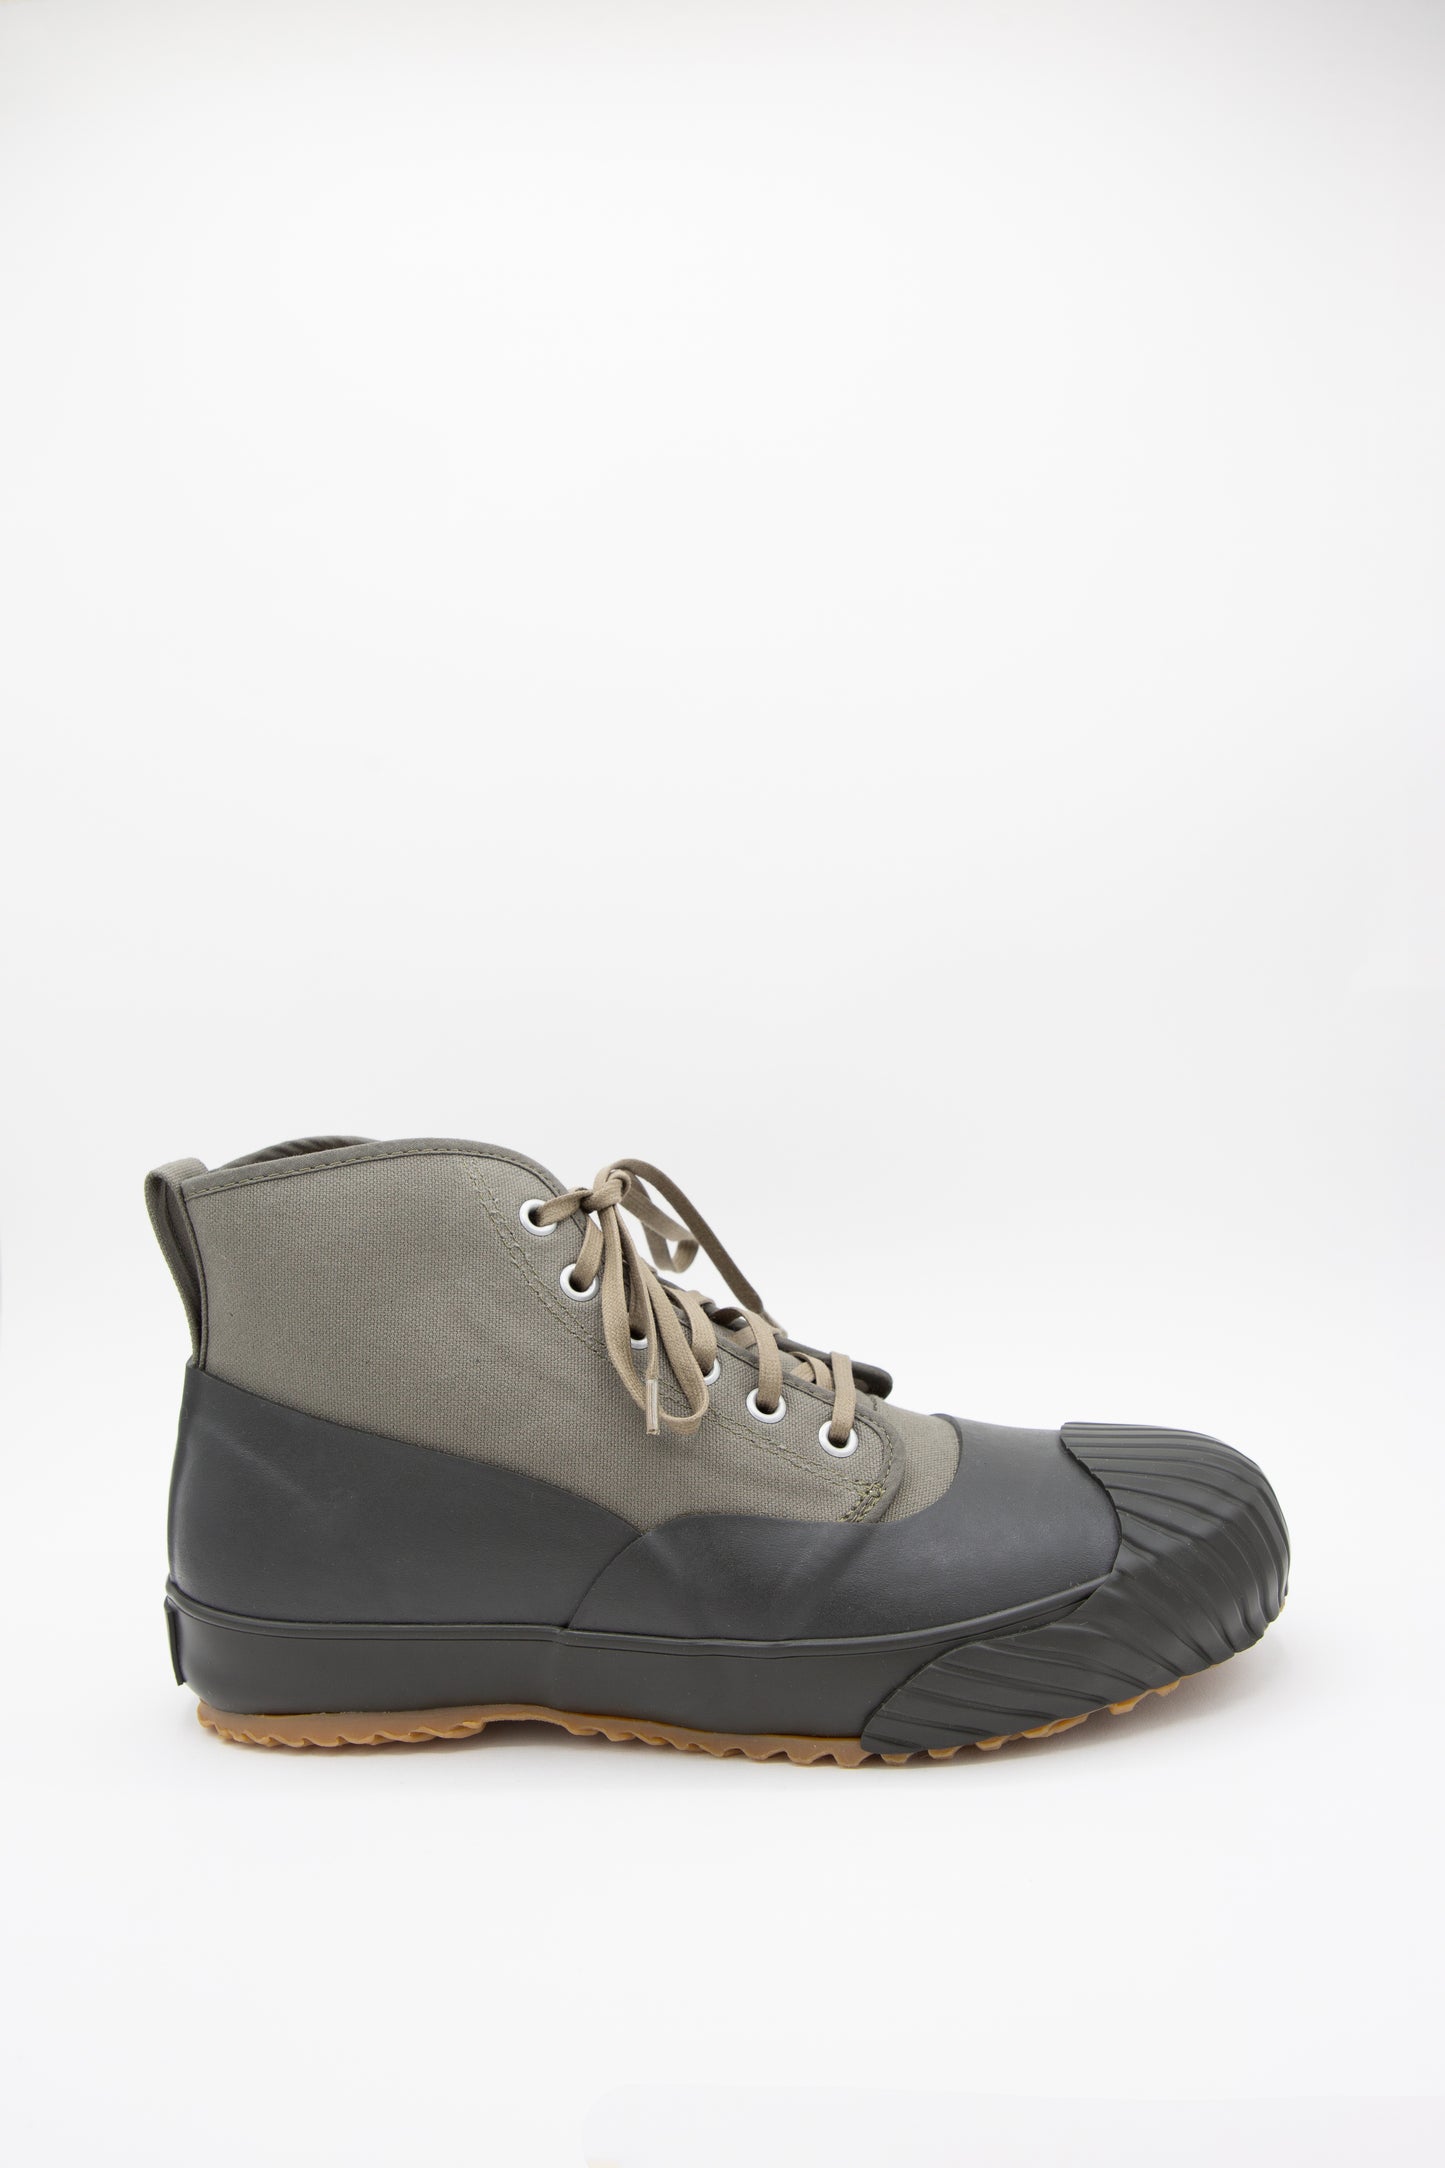 A pair of Moonstar Alweather Sneaker in Olive boots with a rubber sole on a white background. Side view.